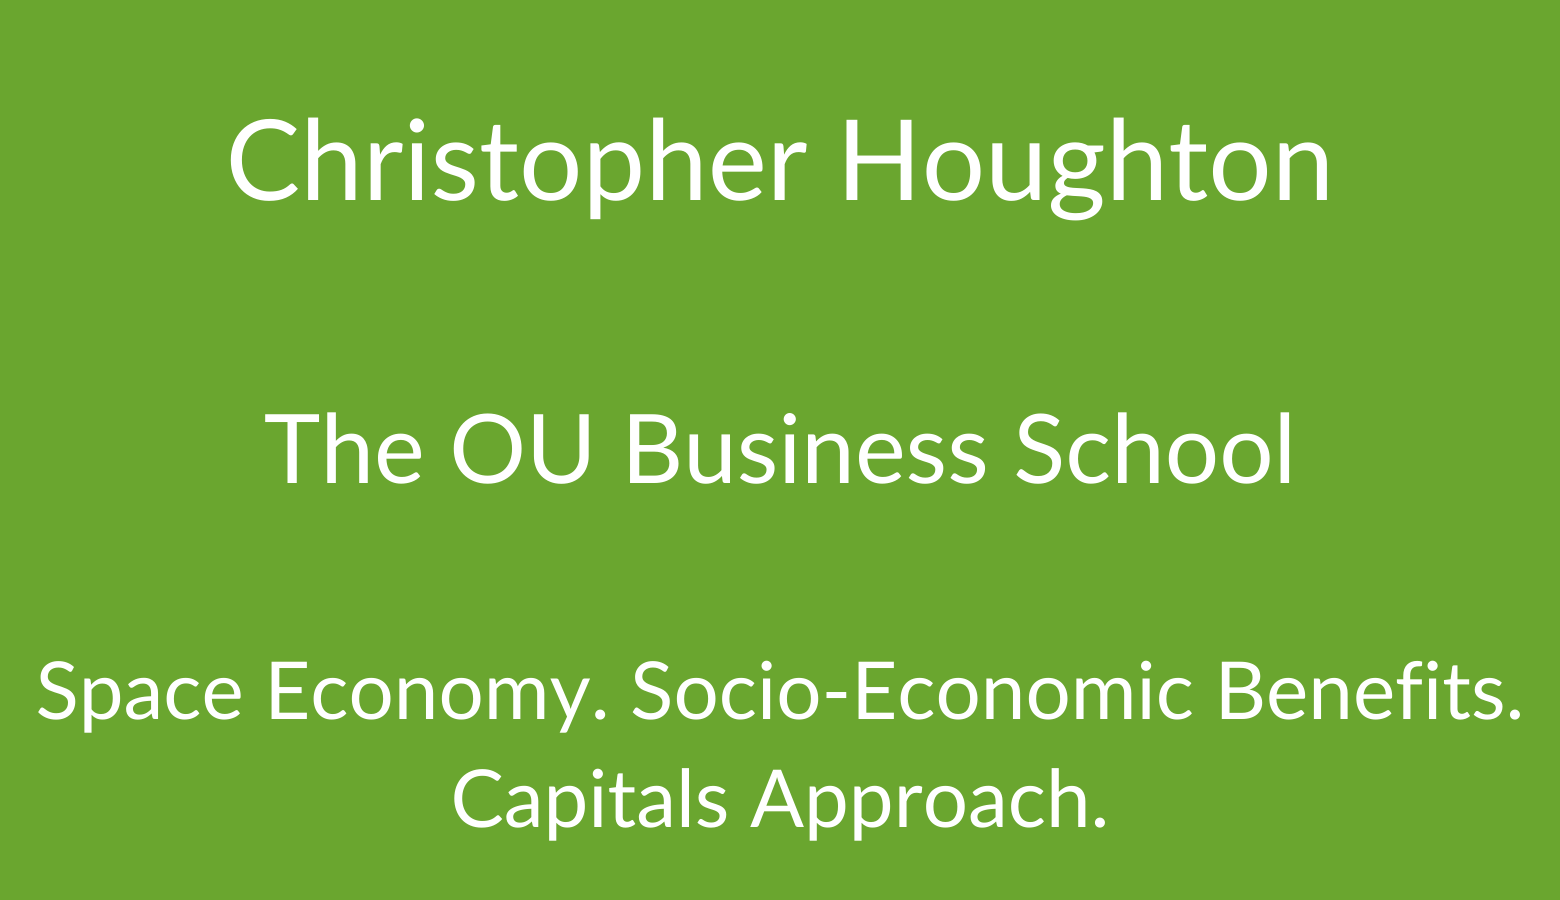 Christopher Houghton. The OU Business School. Space Economy, Socio-Economic Benefits. Capitals Approach.